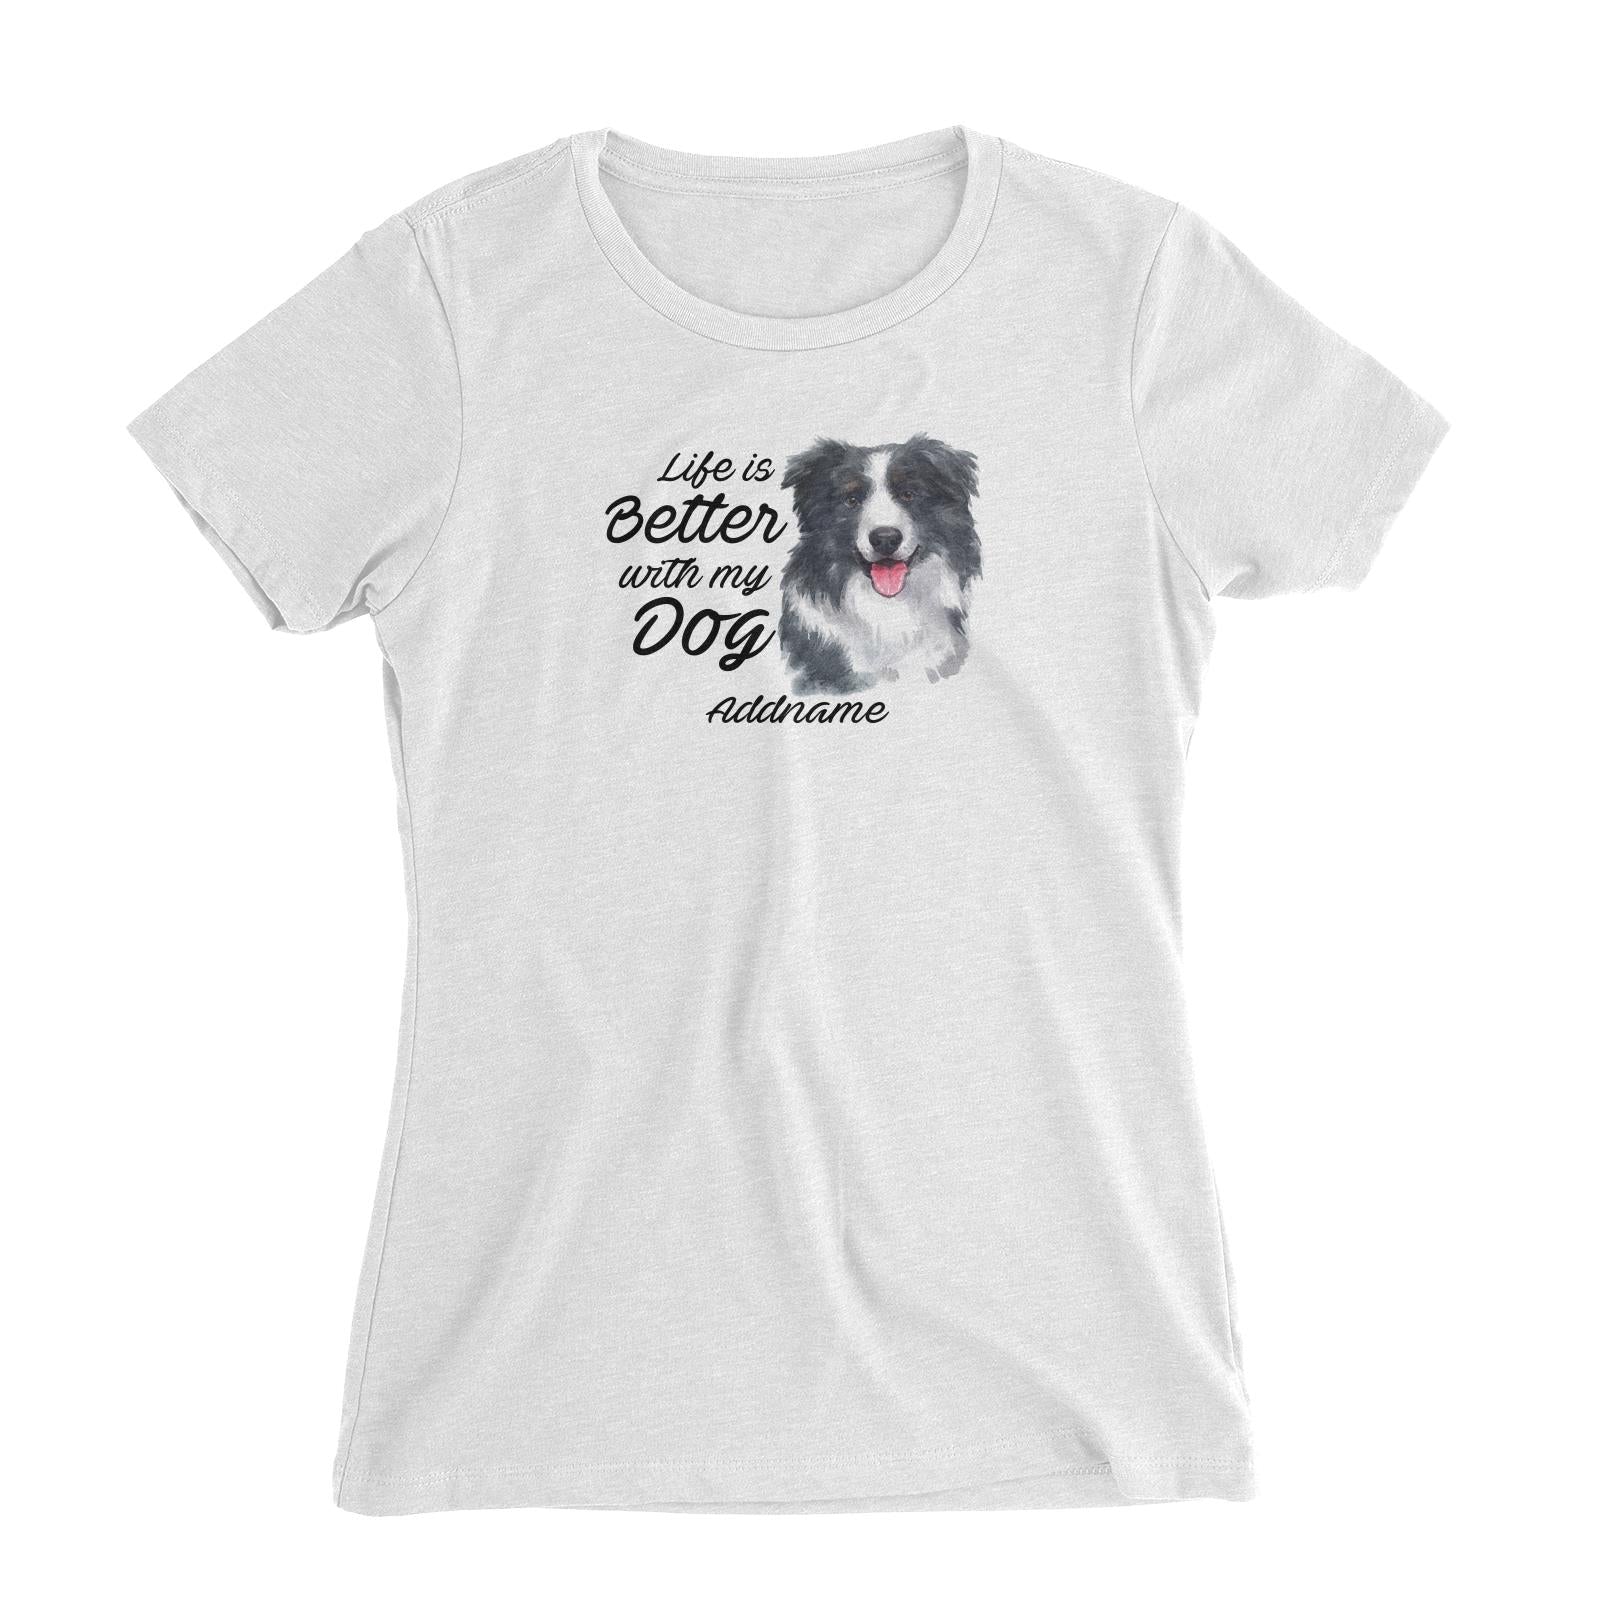 Watercolor Life is Better With My Dog Border Collie Addname Women's Slim Fit T-Shirt